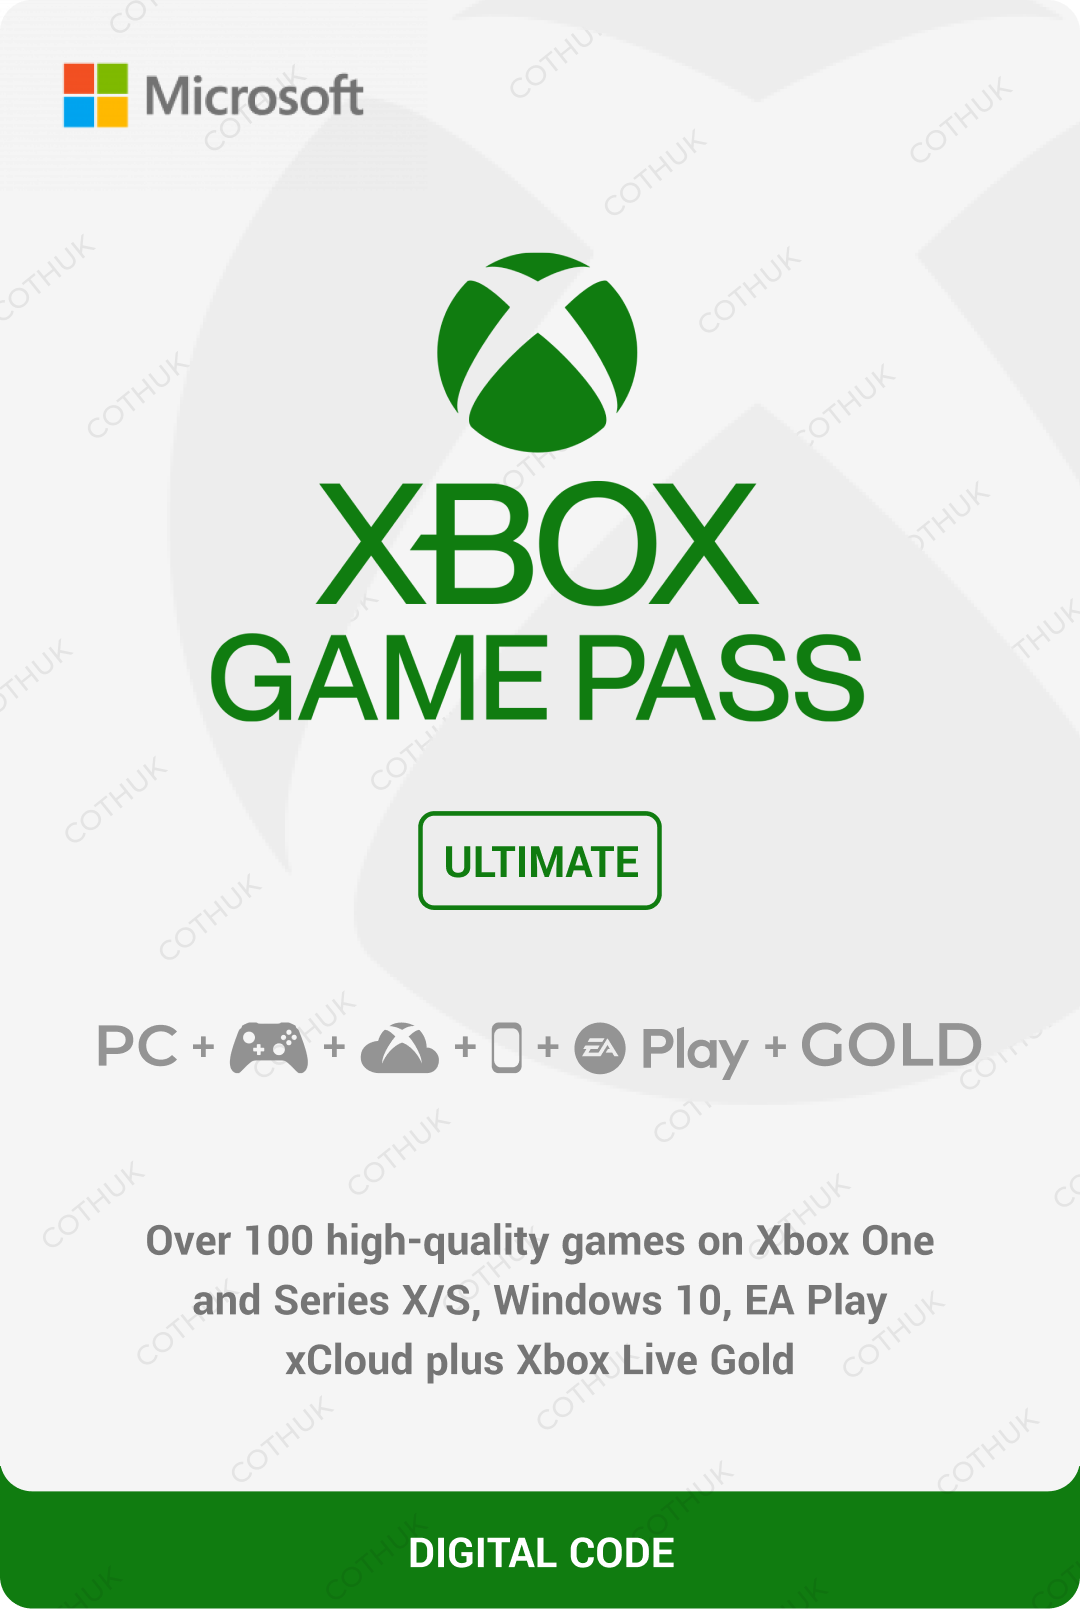 buying xbox game pass ultimate